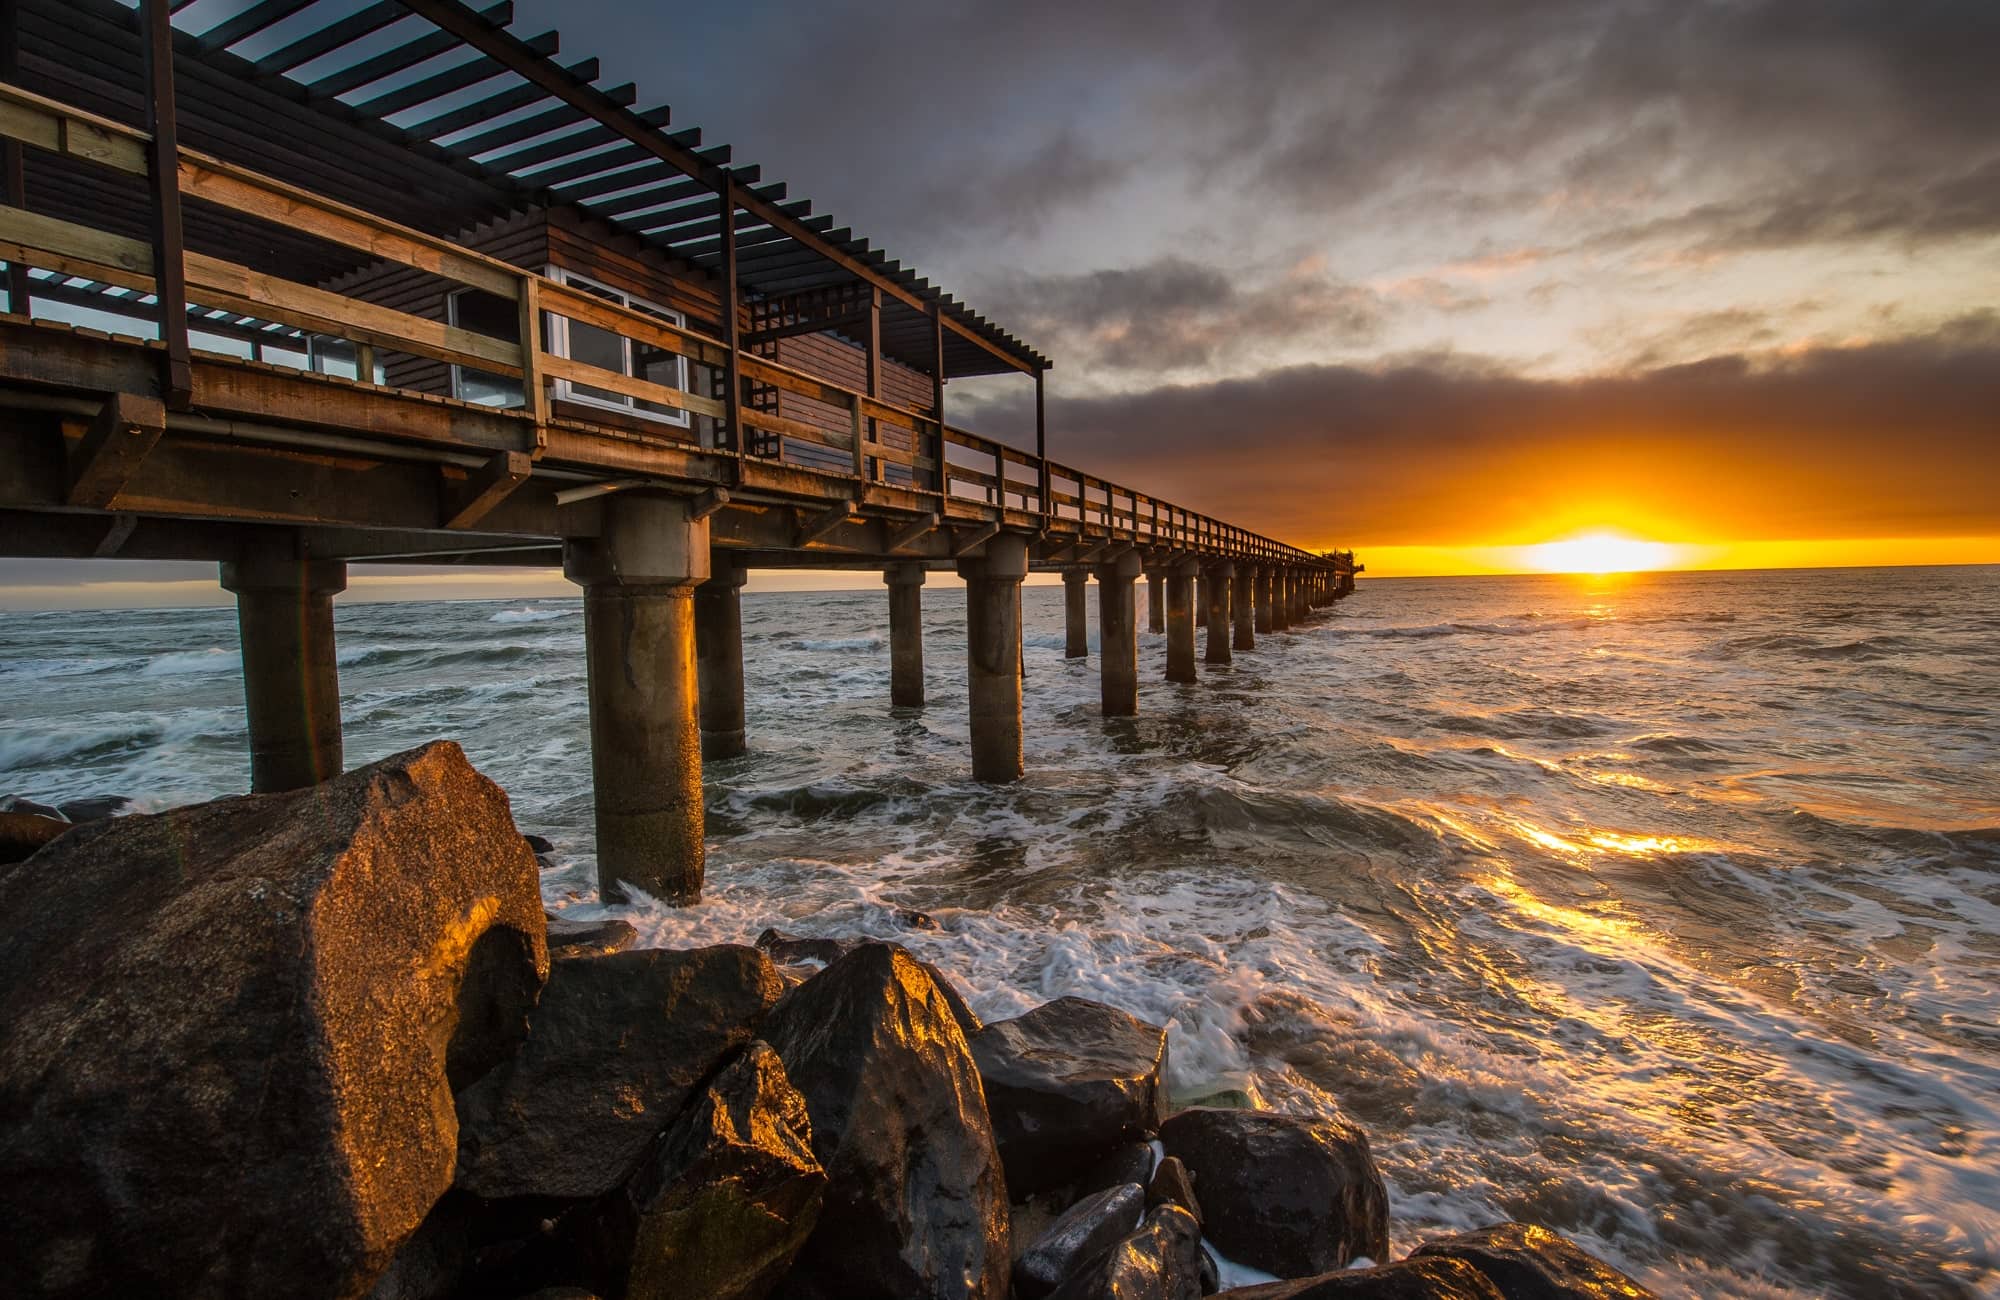 Jetty and Sunset View